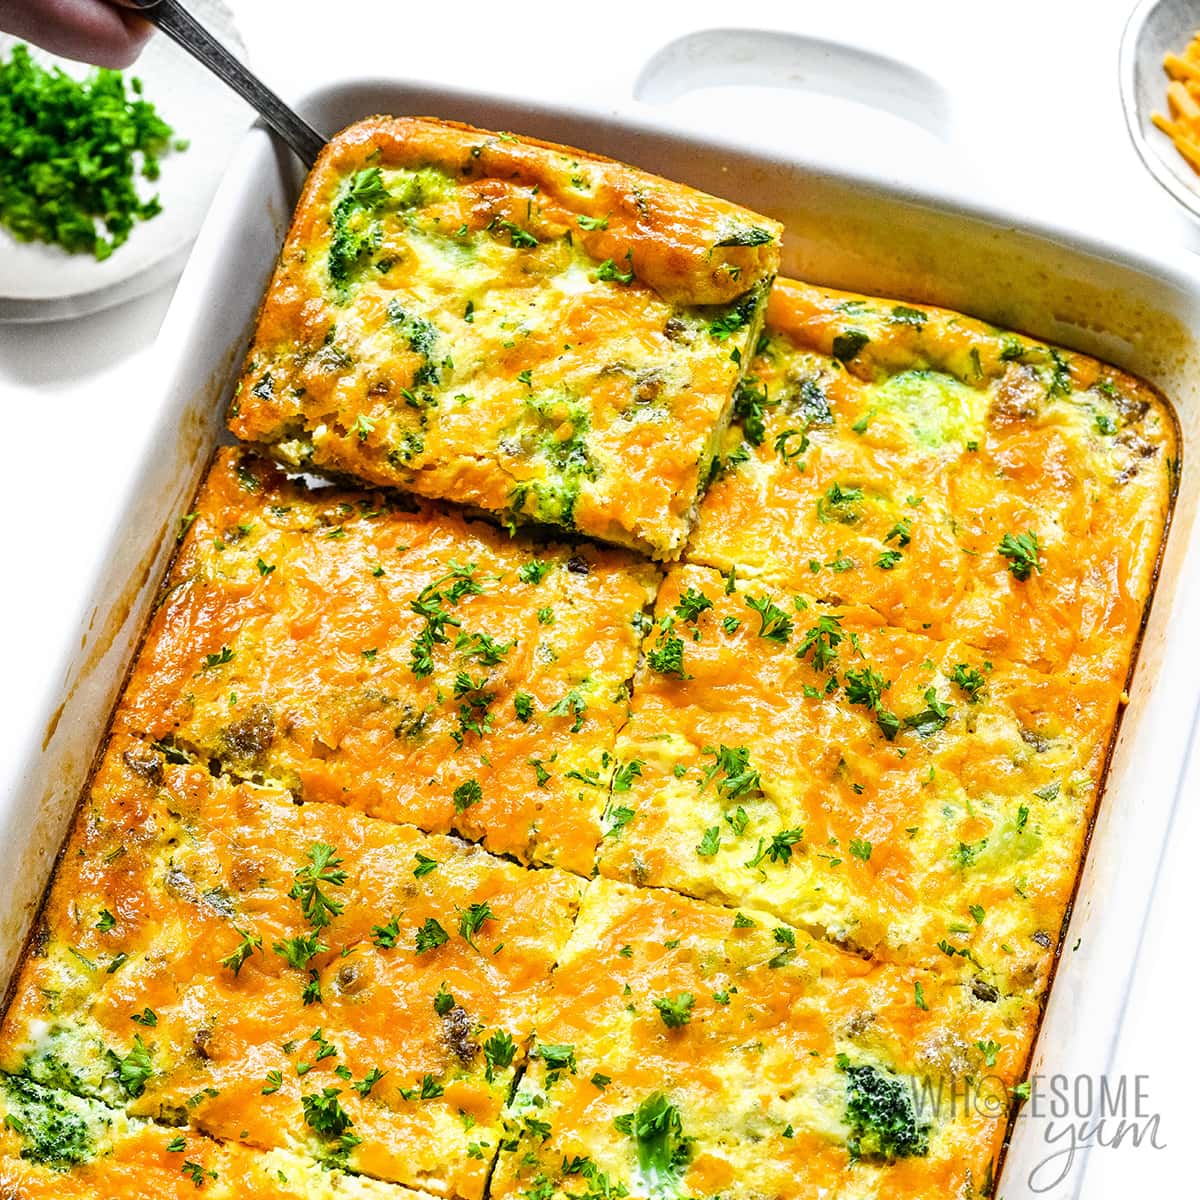 Sausage Egg and Cheese Casserole